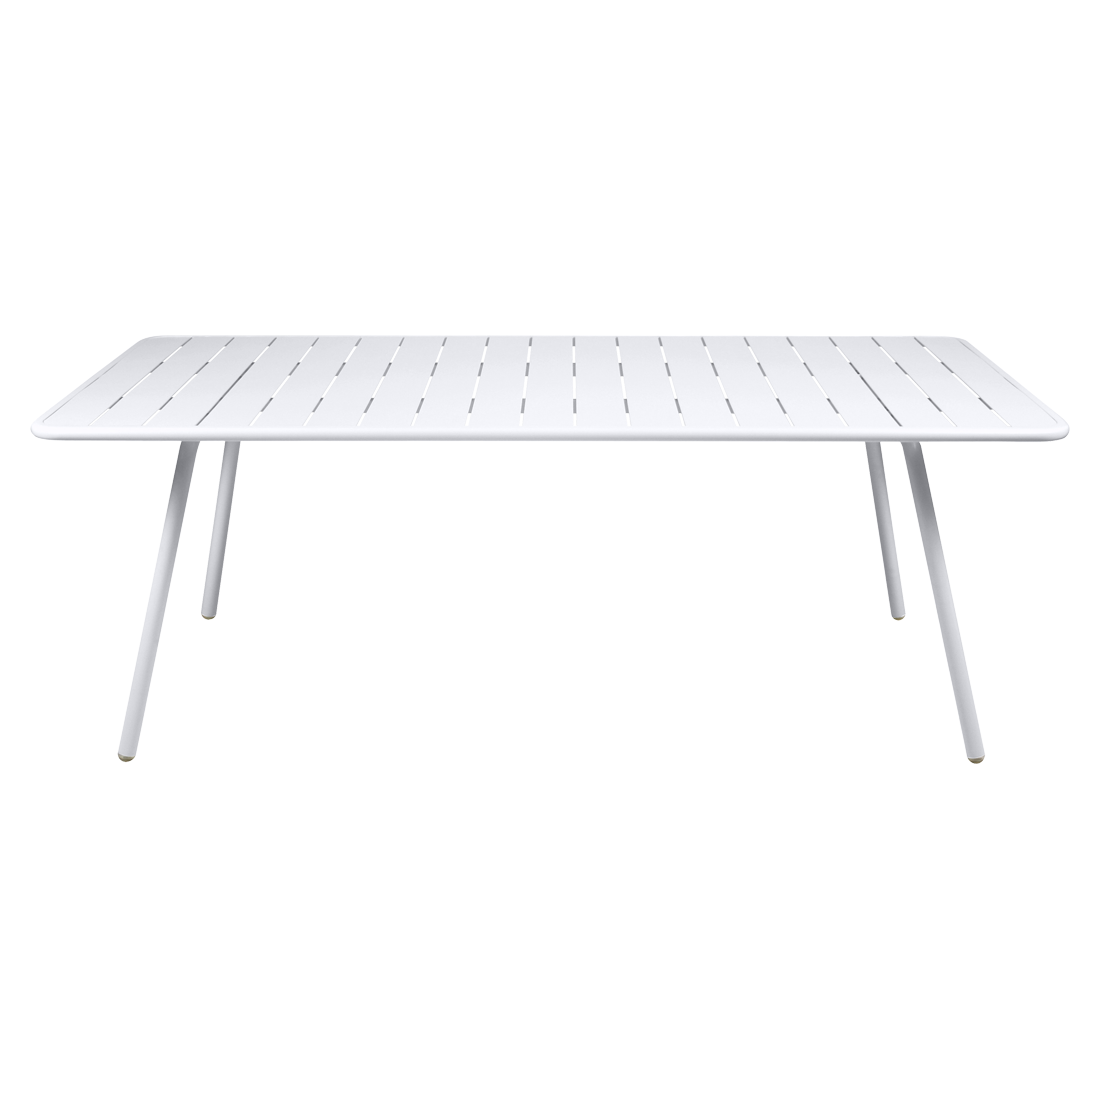 FERMOB Luxembourg 8-10 Seater Outdoor Dining Table